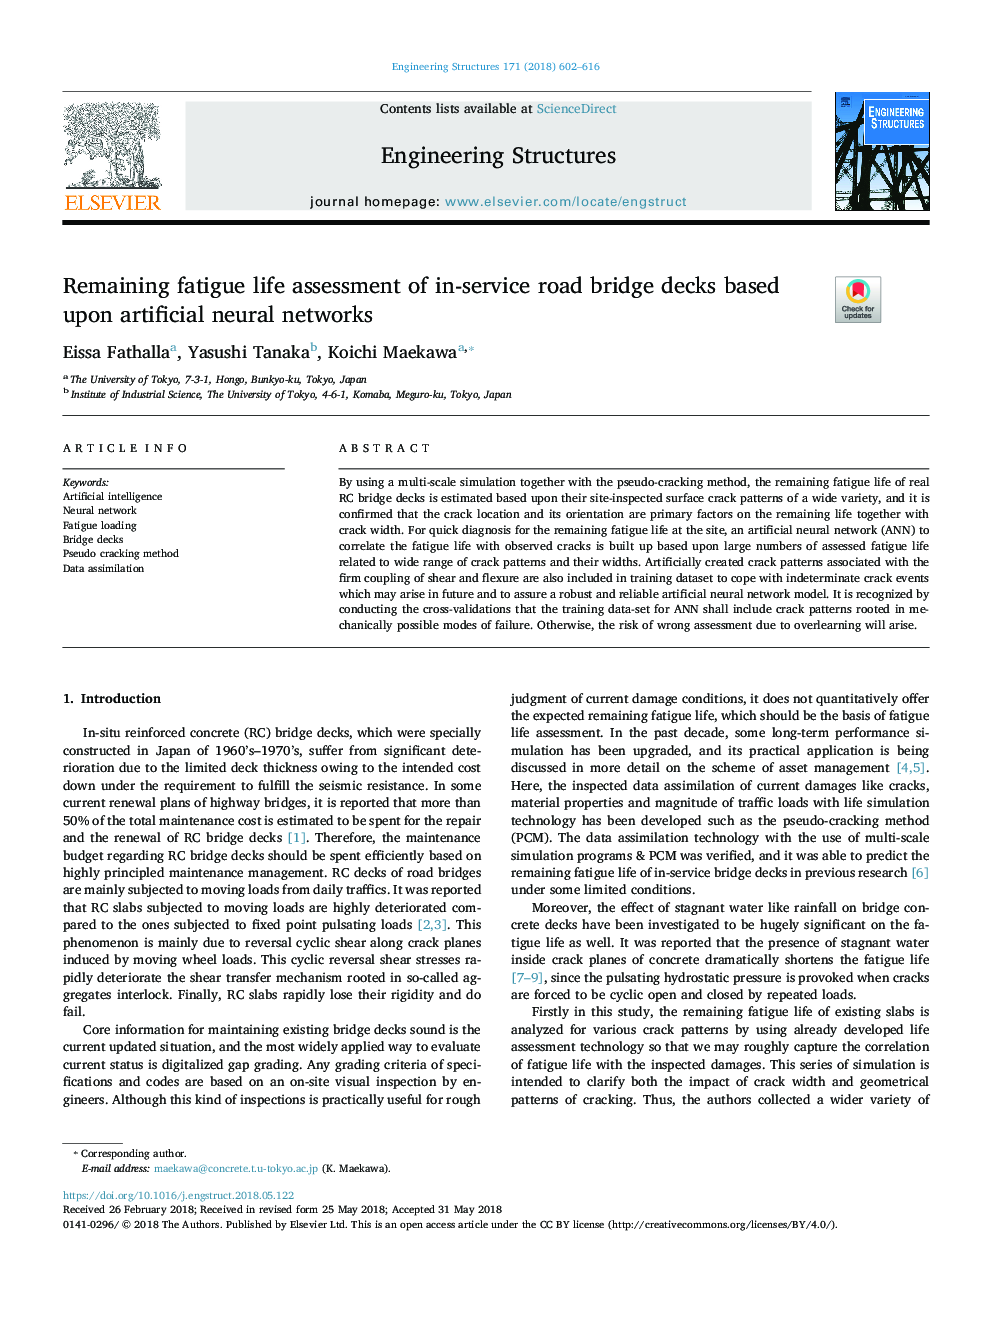 Remaining fatigue life assessment of in-service road bridge decks based upon artificial neural networks